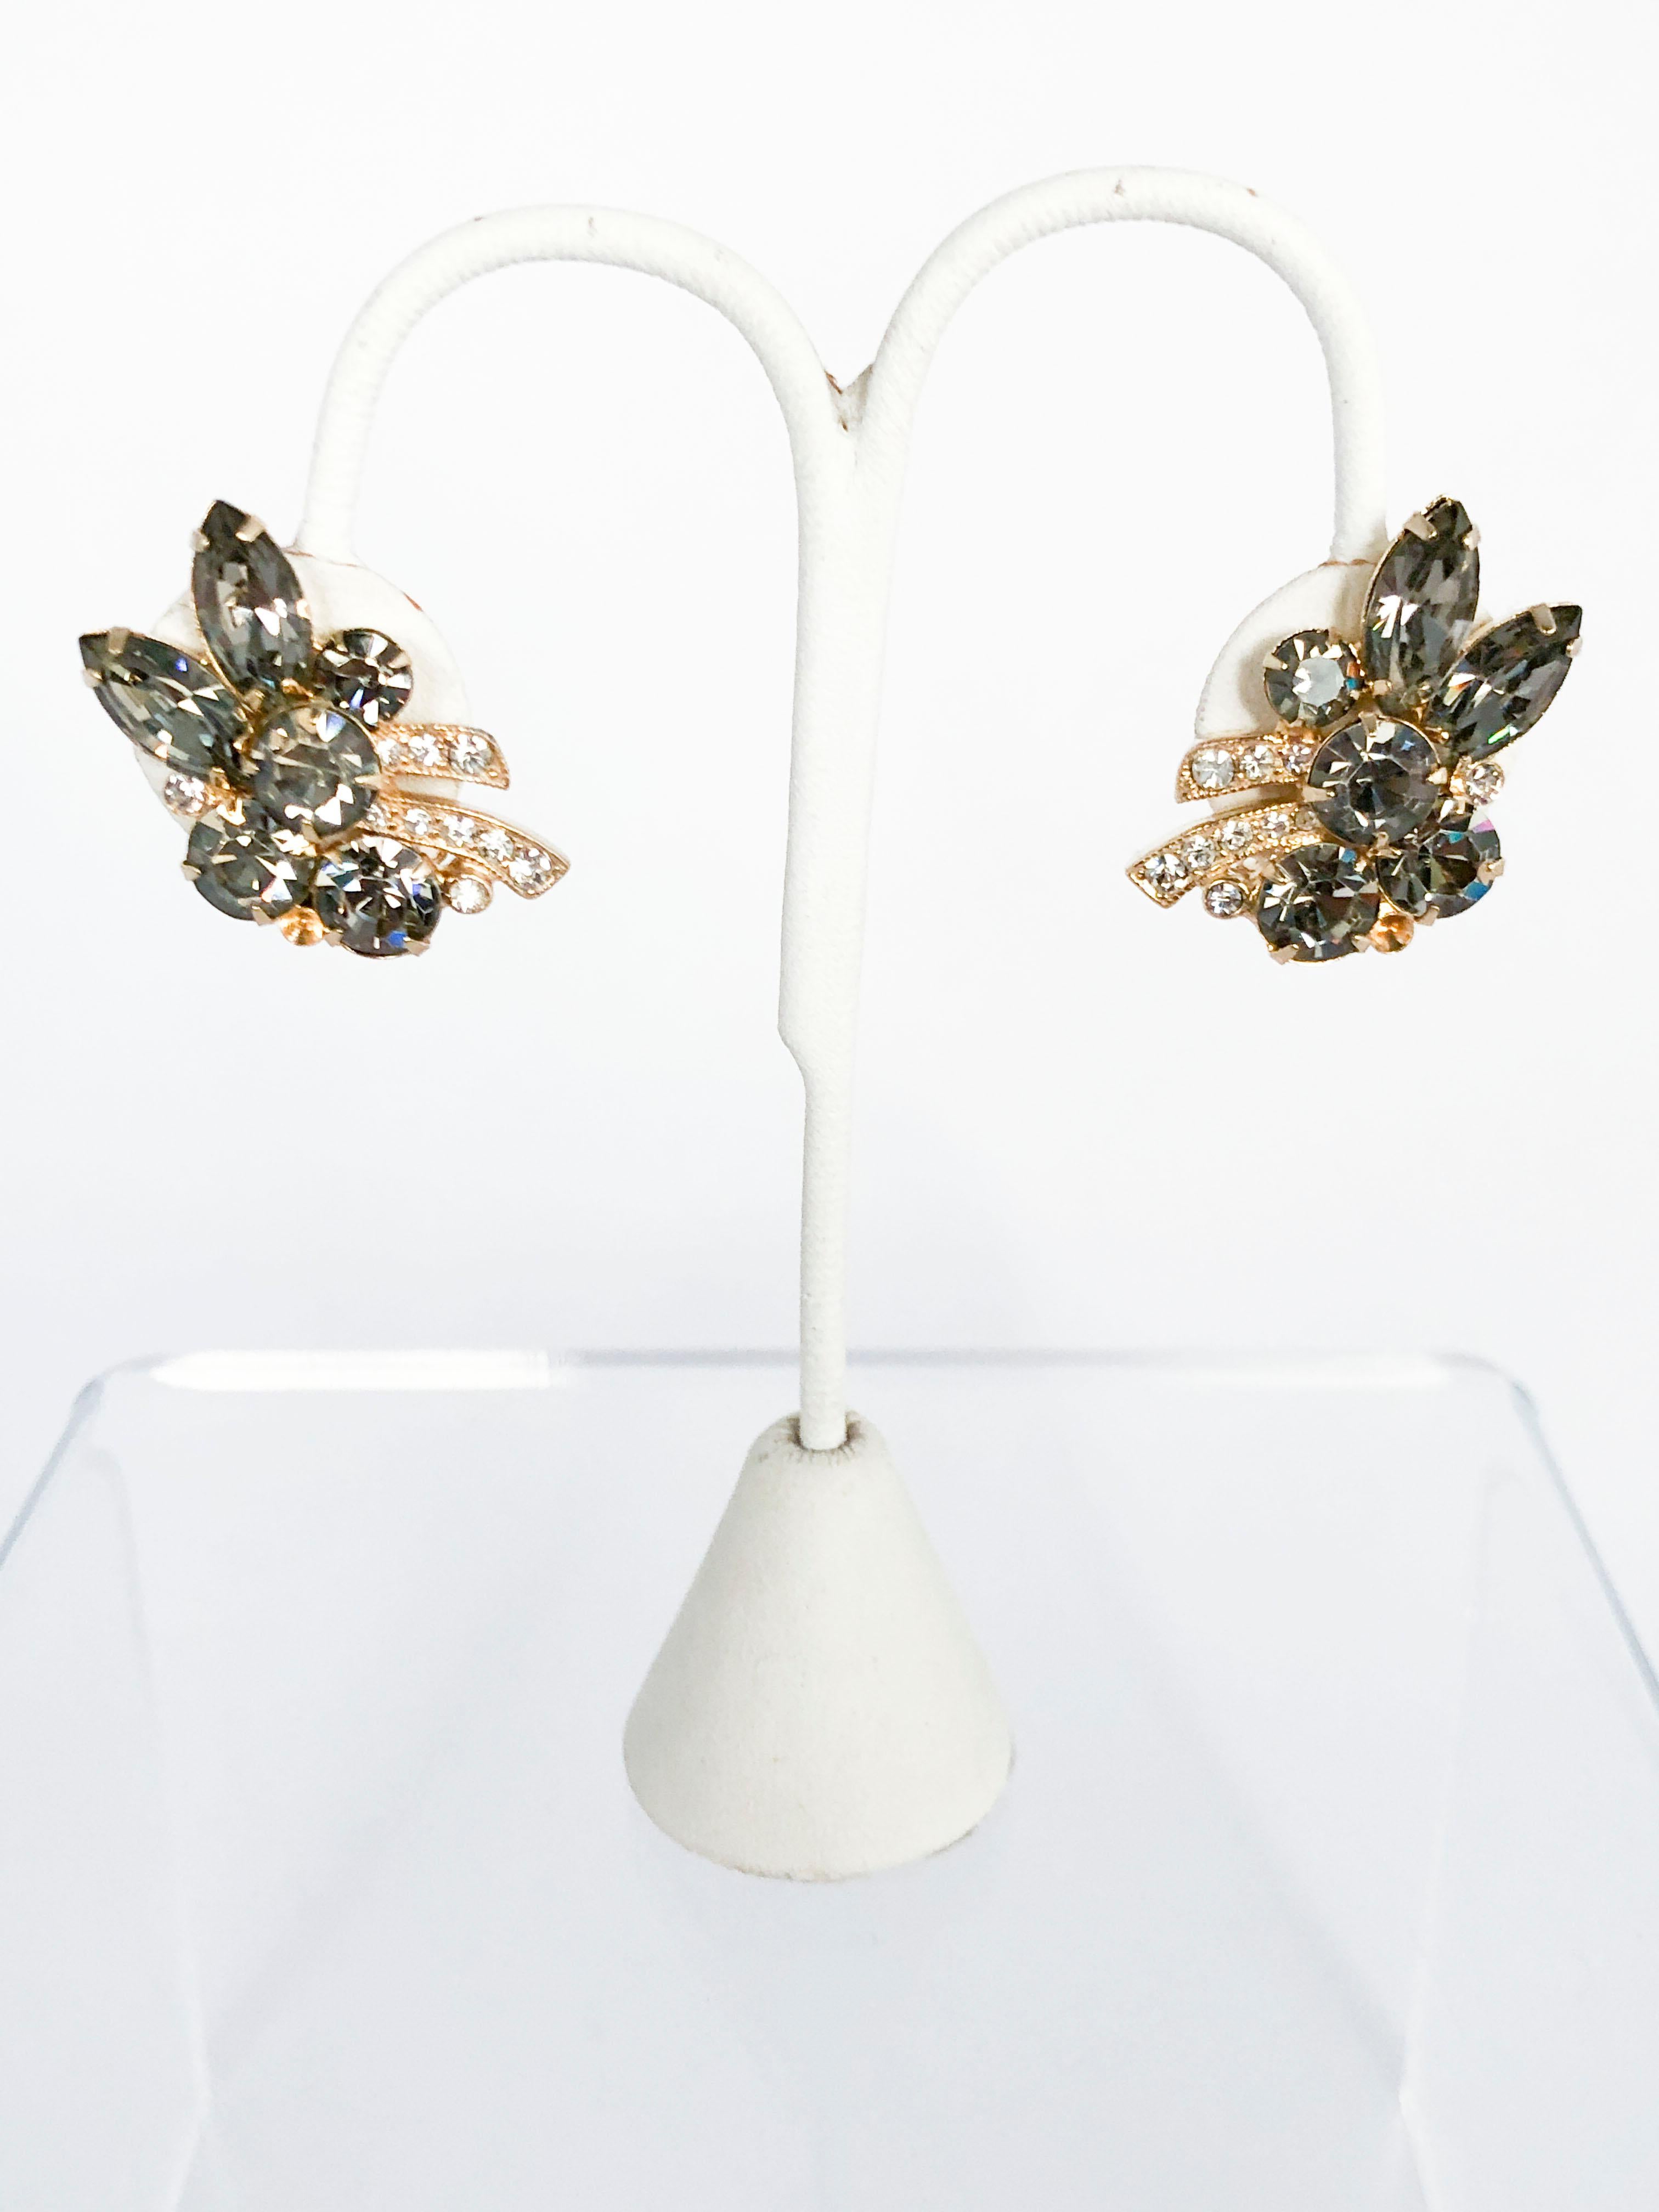 1950s Eisenberg brooch and clip-on earring set. The smoky grey and clear multi-cut rhinestones are set in a gold-wash base metal. The back of the brooch has a standard brooch pin and clearly displays the Eisenberg hallmark.